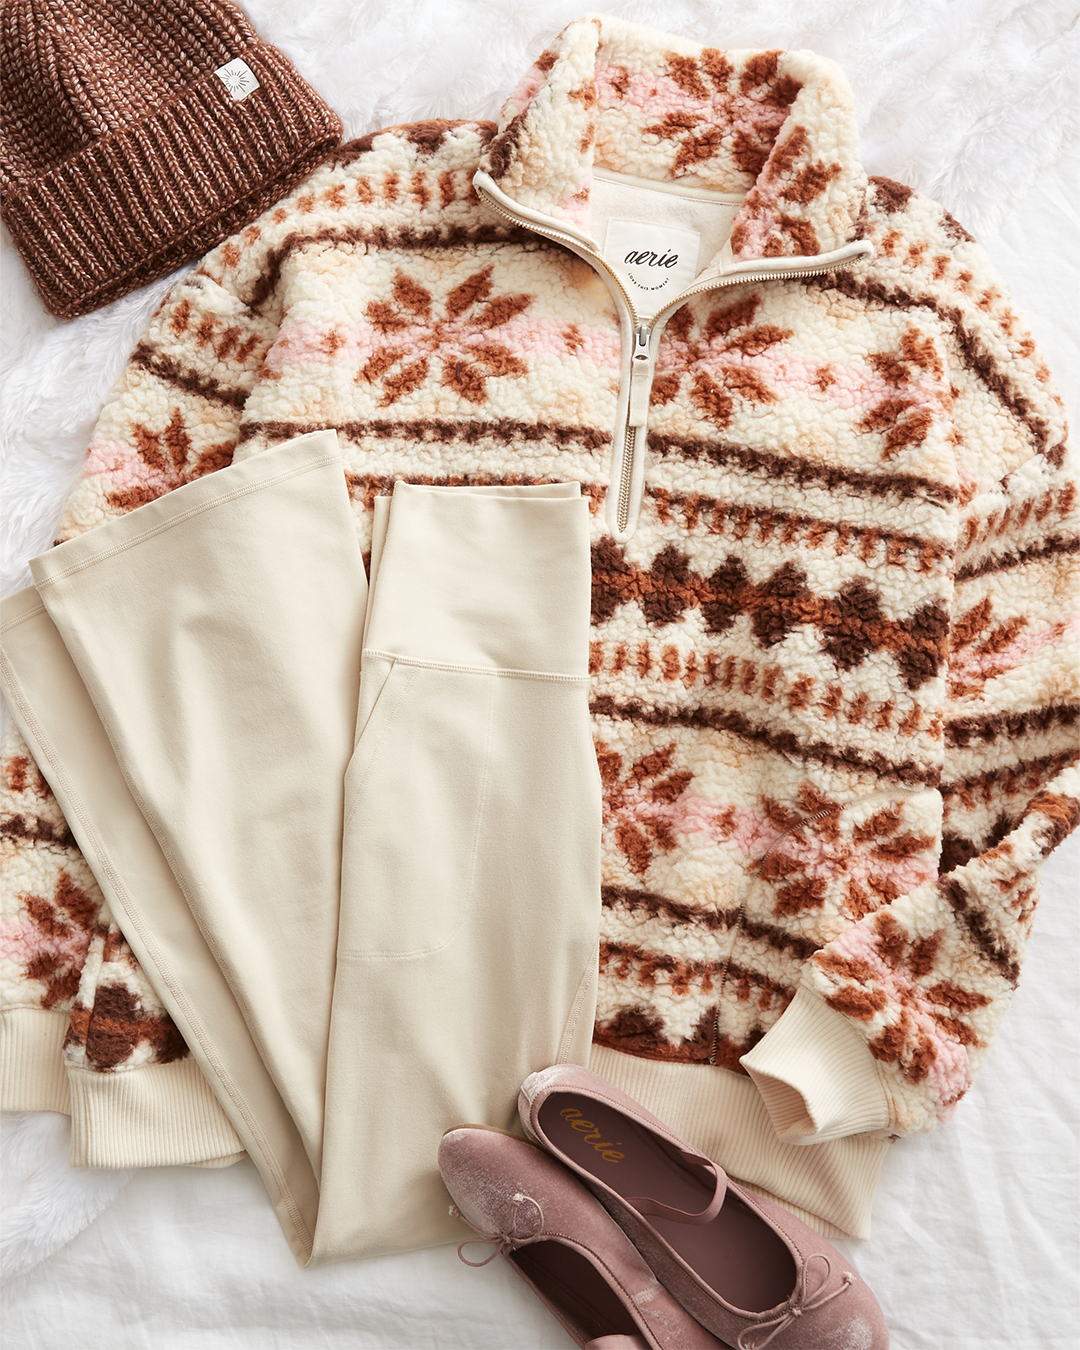 Traveling Home For The Holidays: Here's What To Pack - #AerieREAL Life